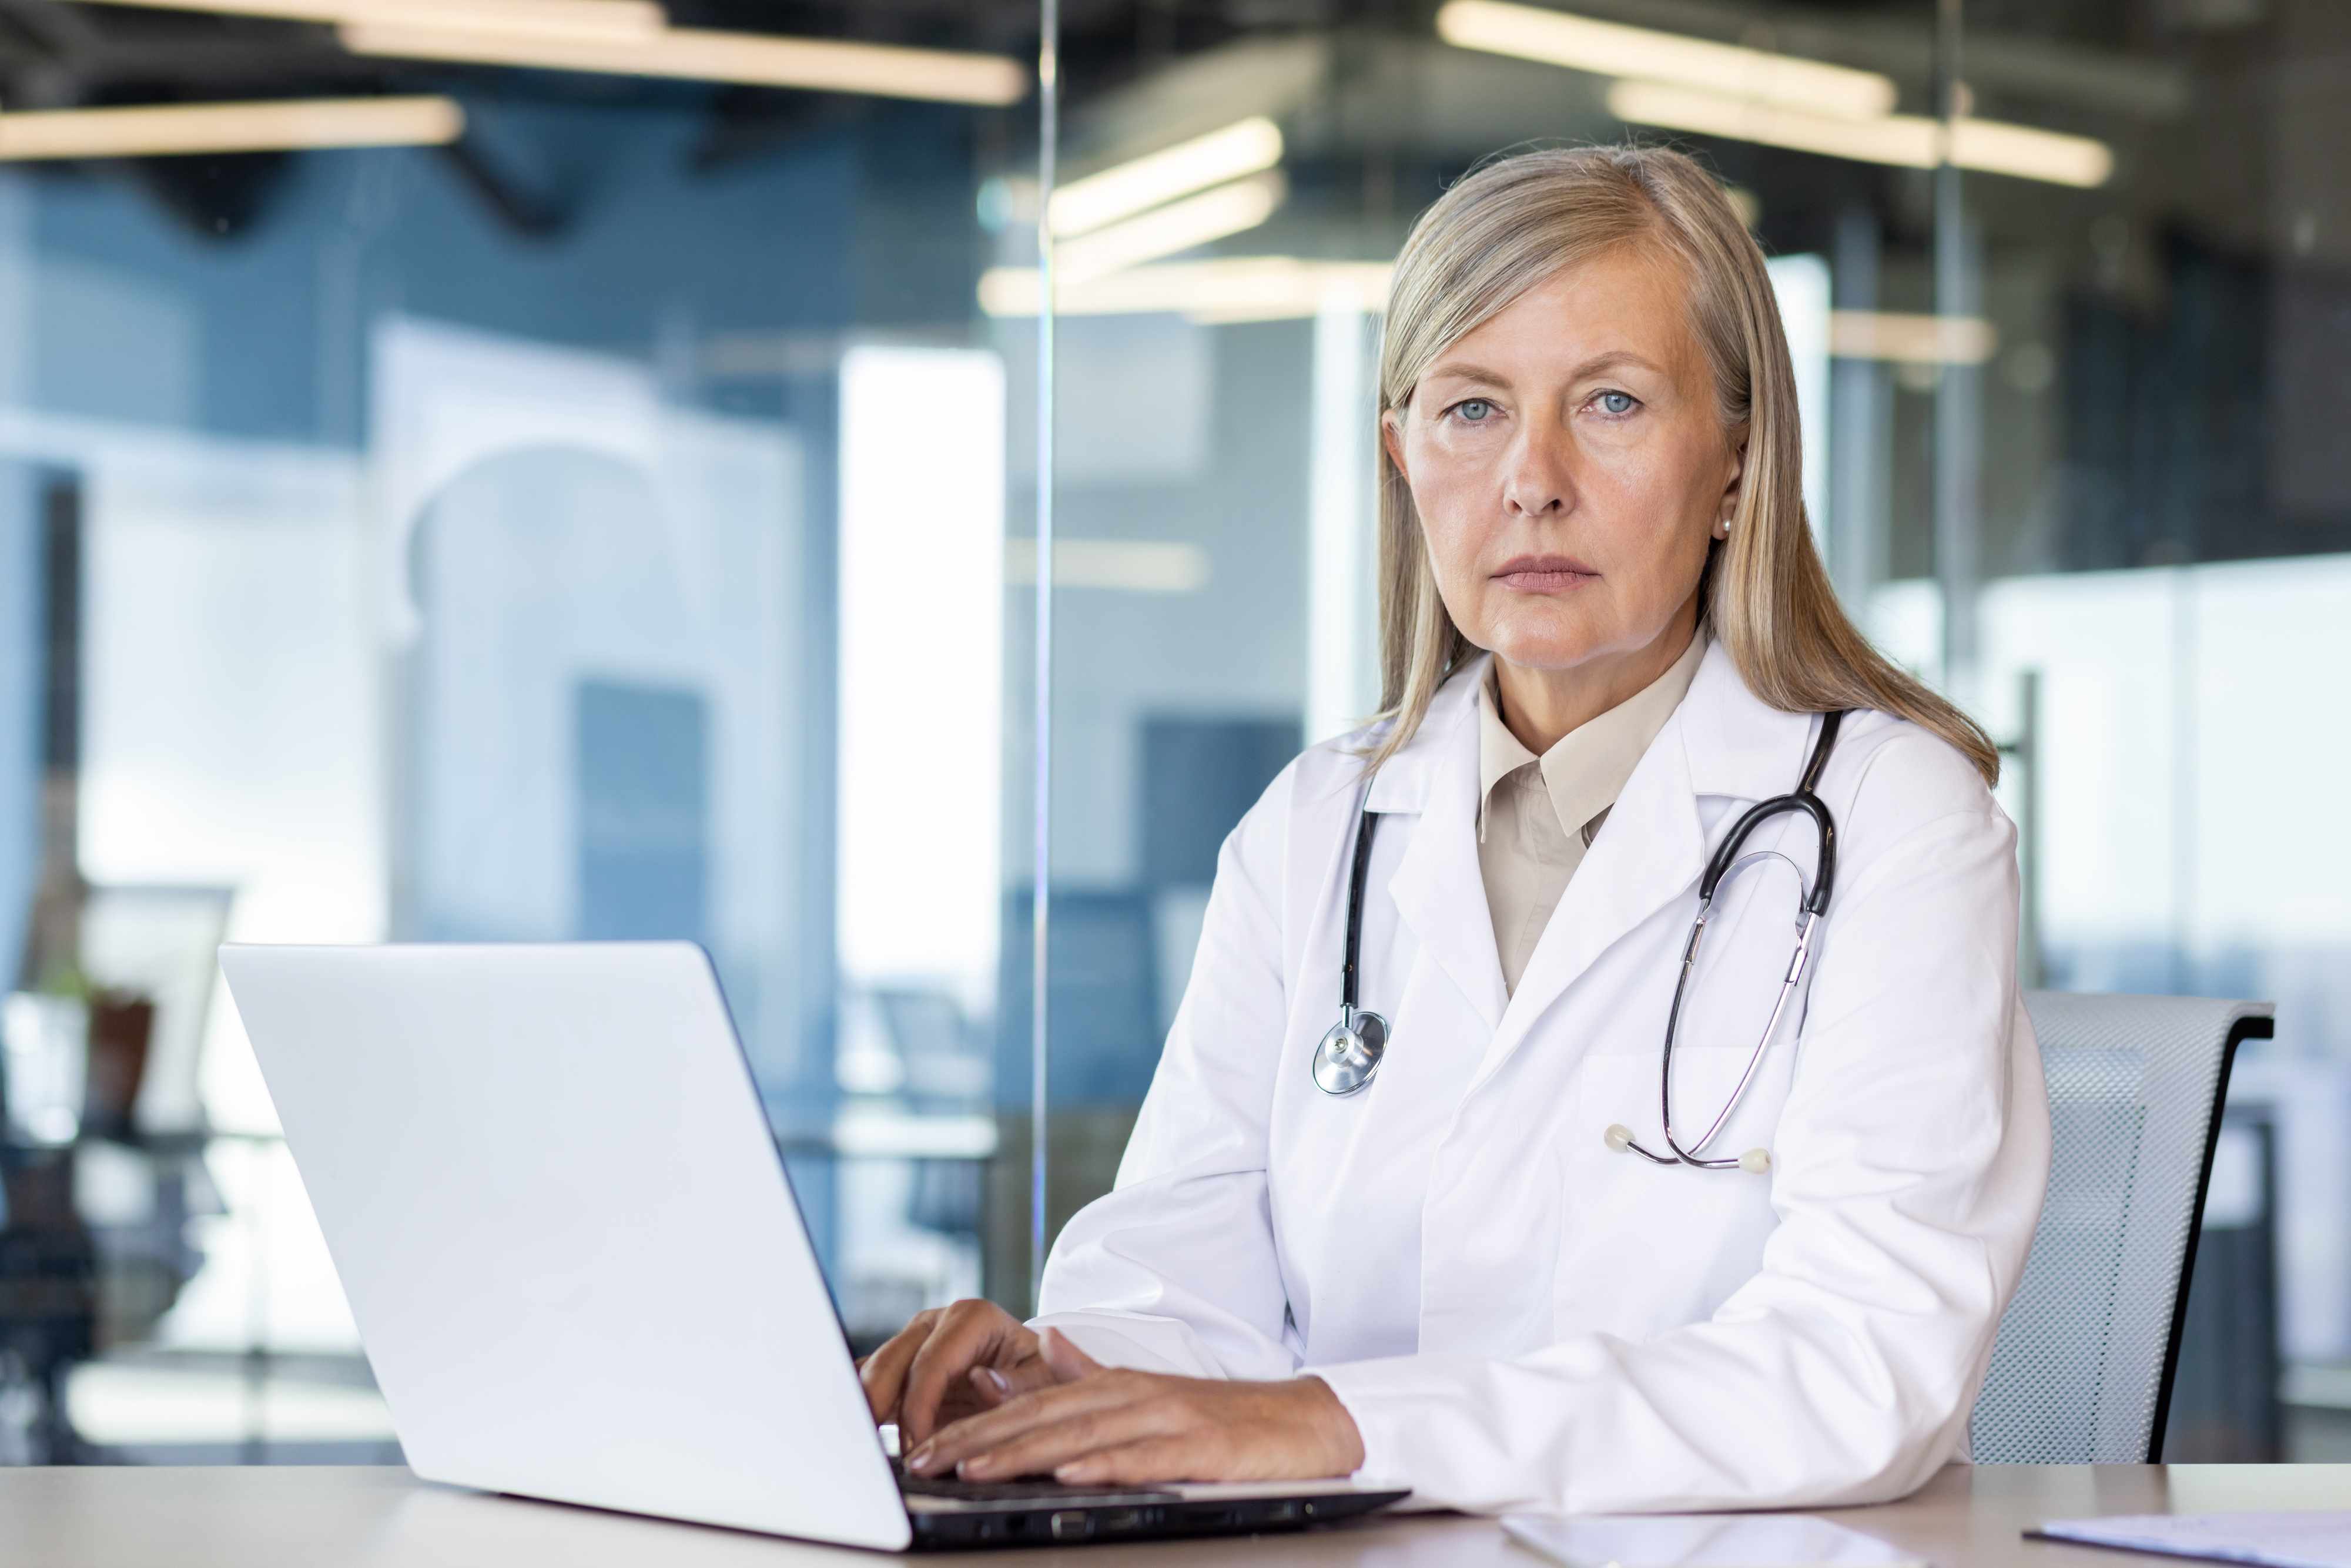 A focused female doctor with a stethoscope typing on a laptop in an office setting